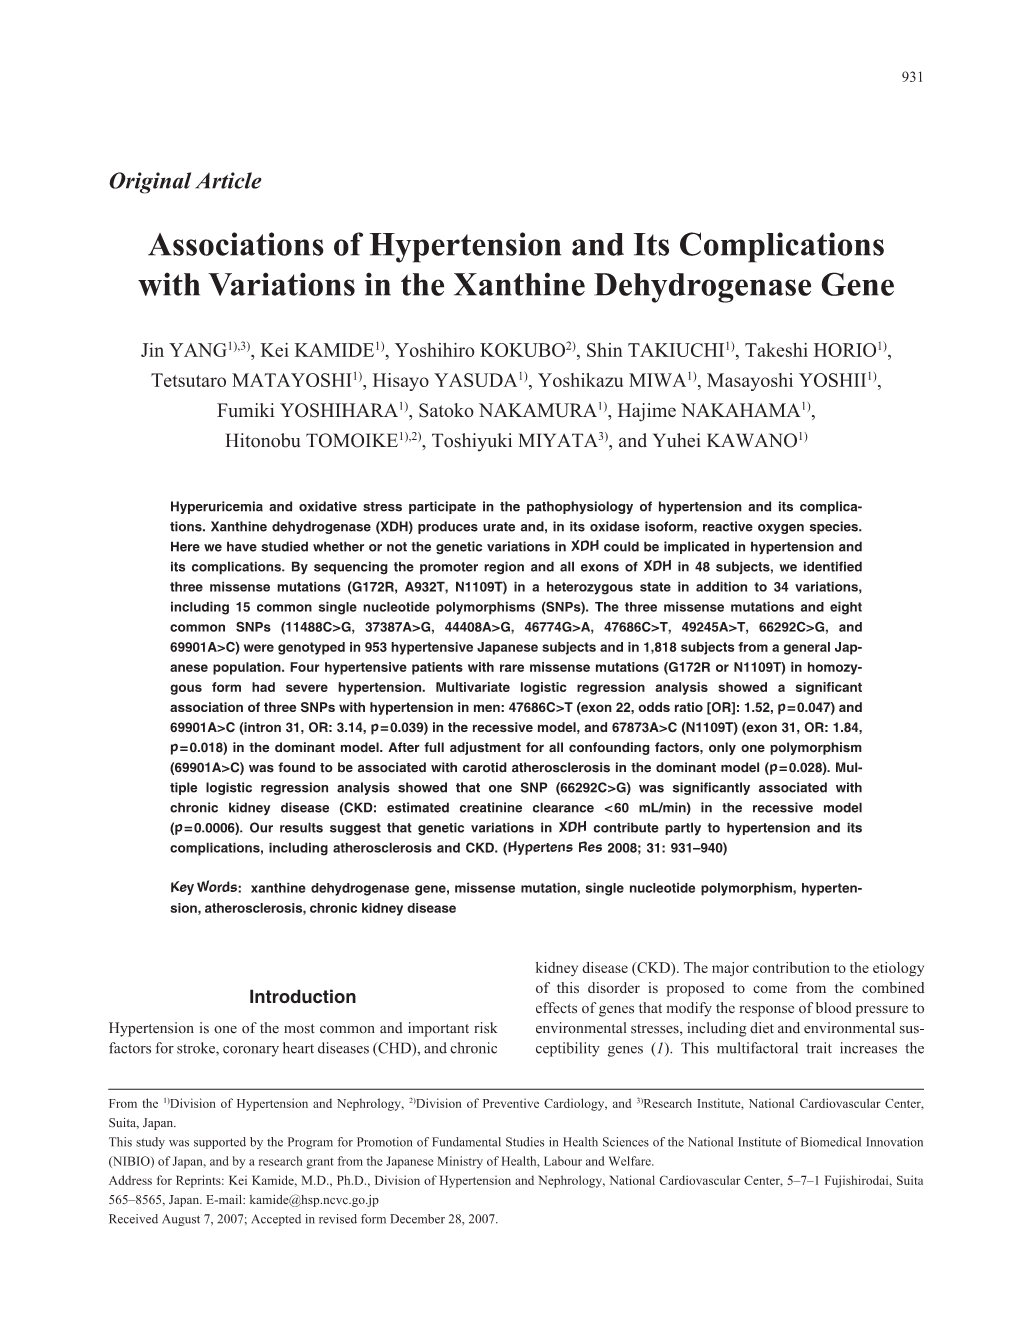 Associations of Hypertension and Its Complications with Variations in the Xanthine Dehydrogenase Gene